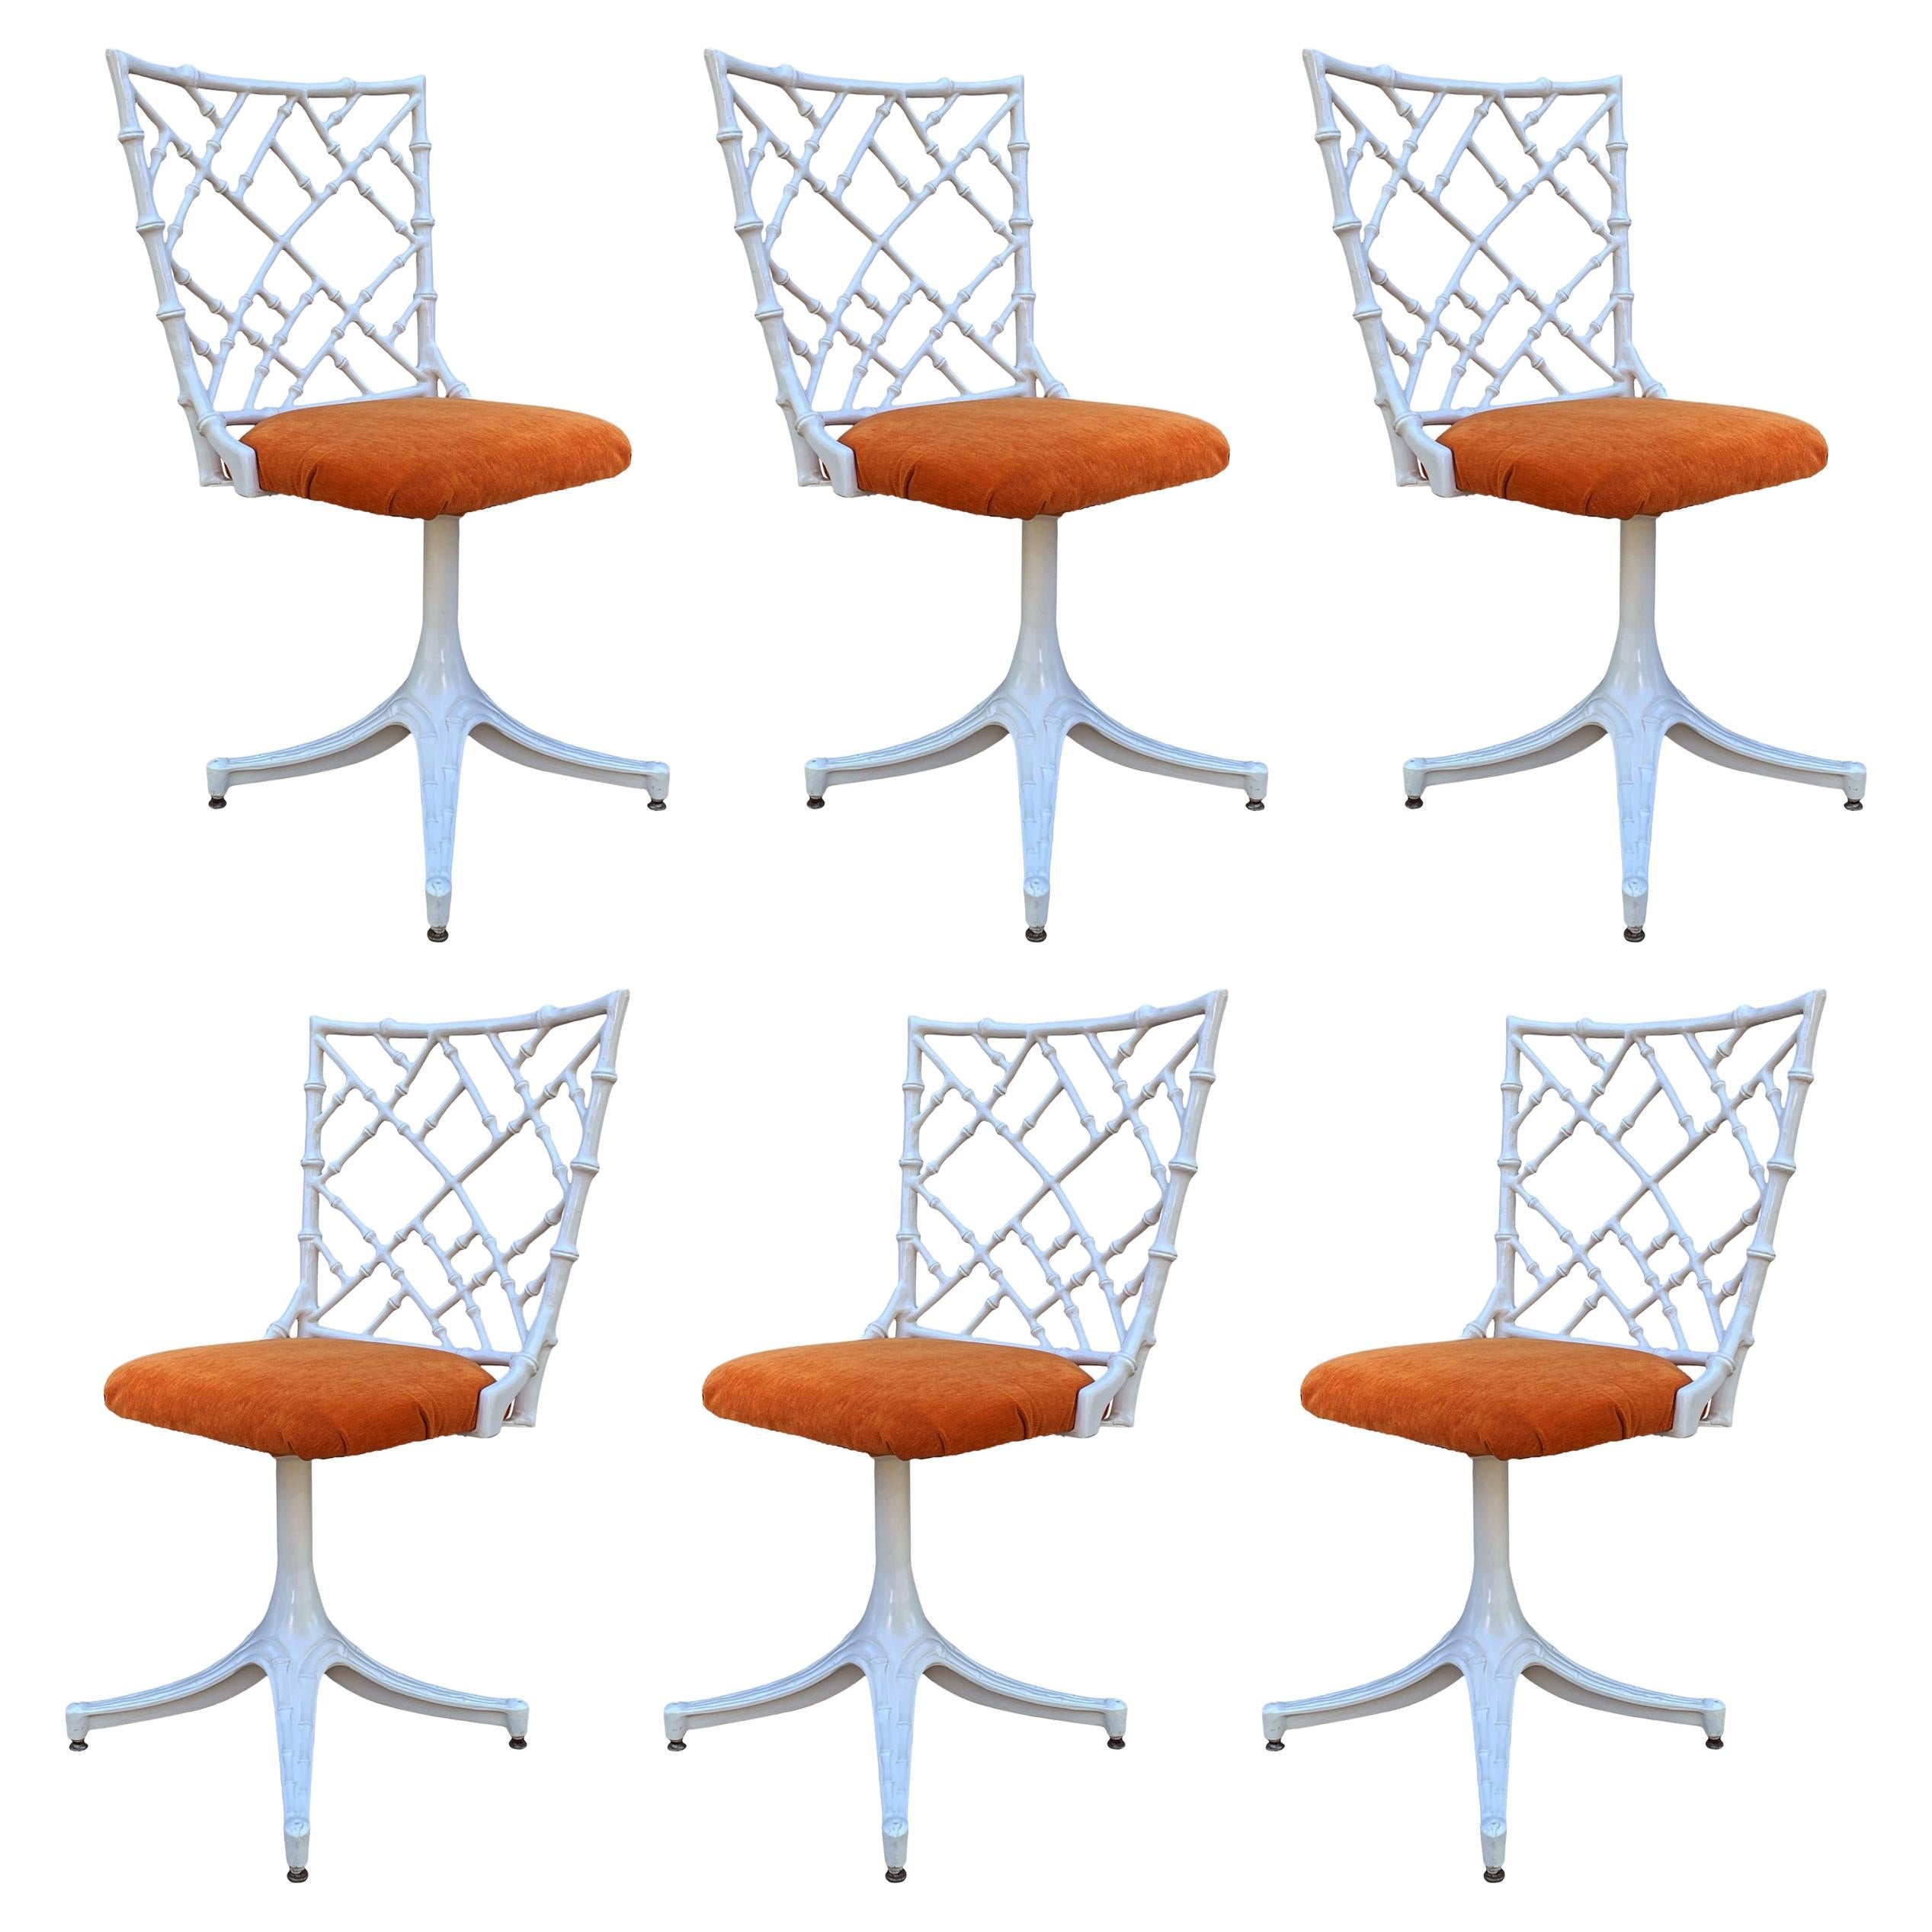 Six Mid Century Modern Faux Bamboo Cast Aluminum Dining Chairs by Phyllis Morris